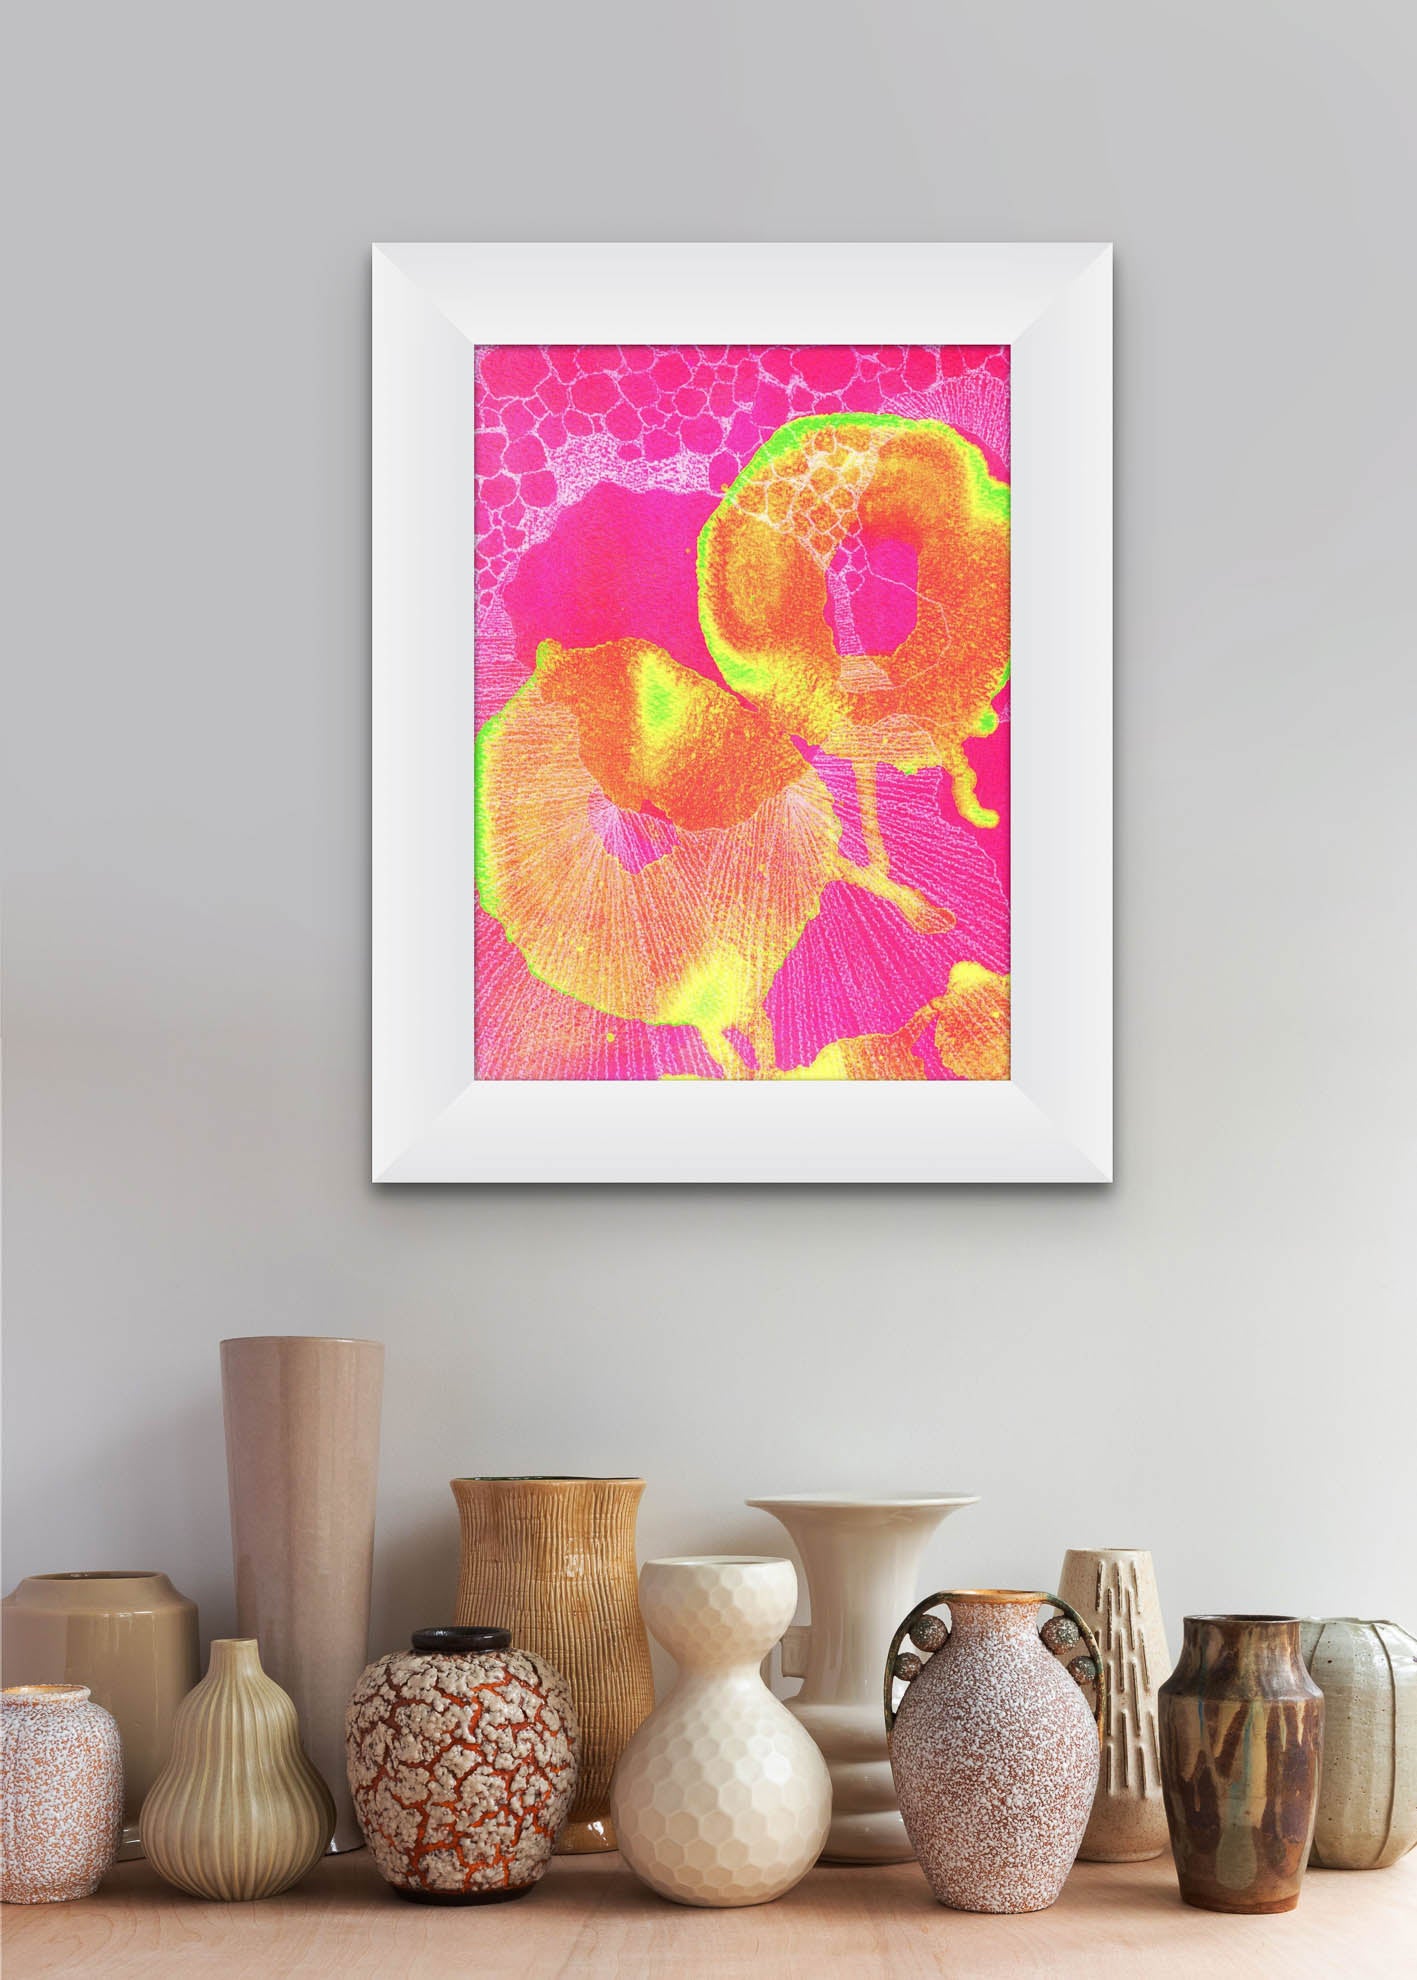 Bright pink, yellow, green and white screen print shown in a white frame in a neutral home space background. 